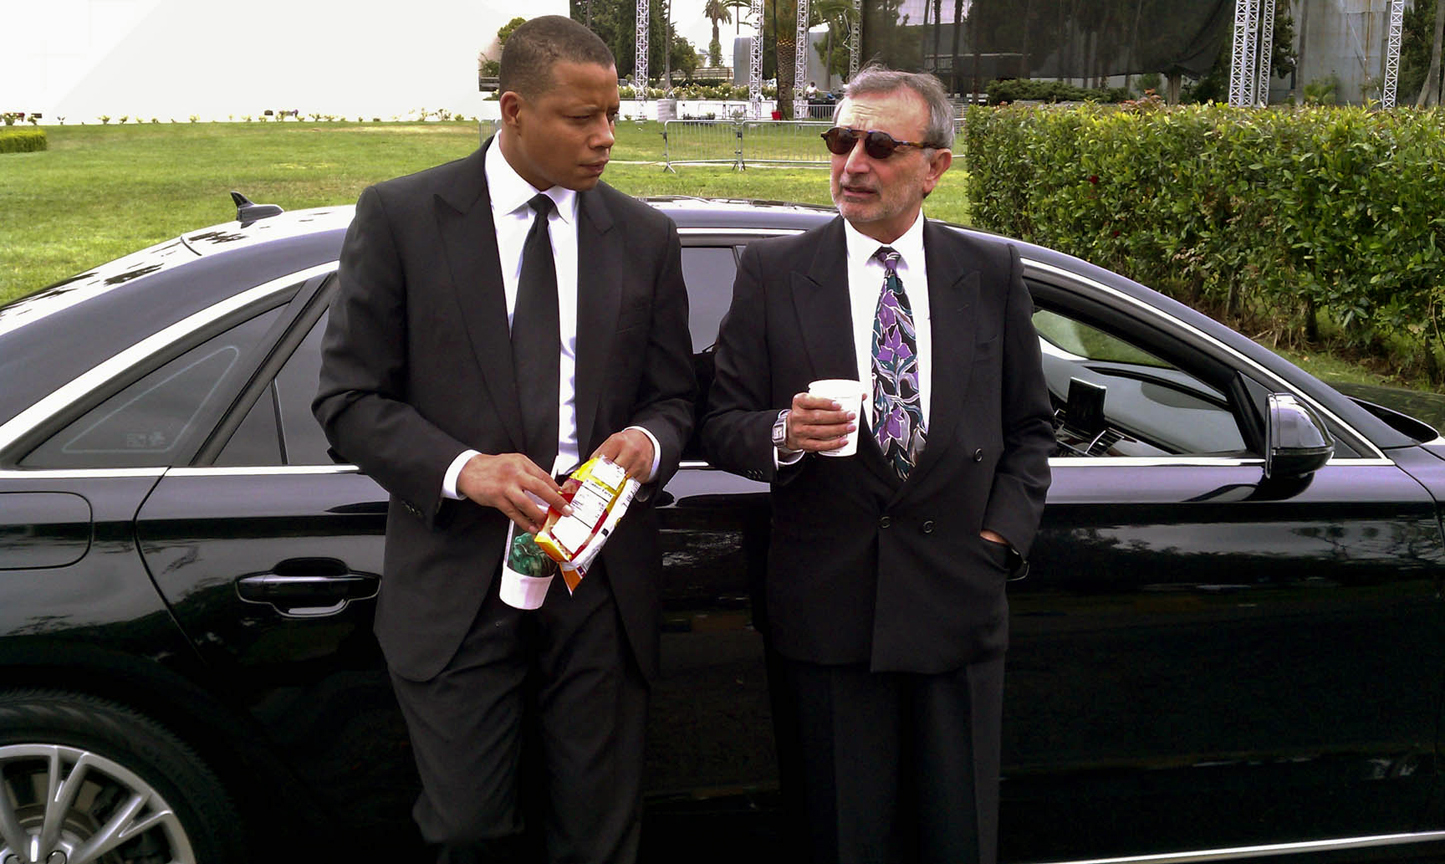 Hollywood Forever Cemetery. David L. Snyder with Terrence Howard. Untitled Comedy - 2012